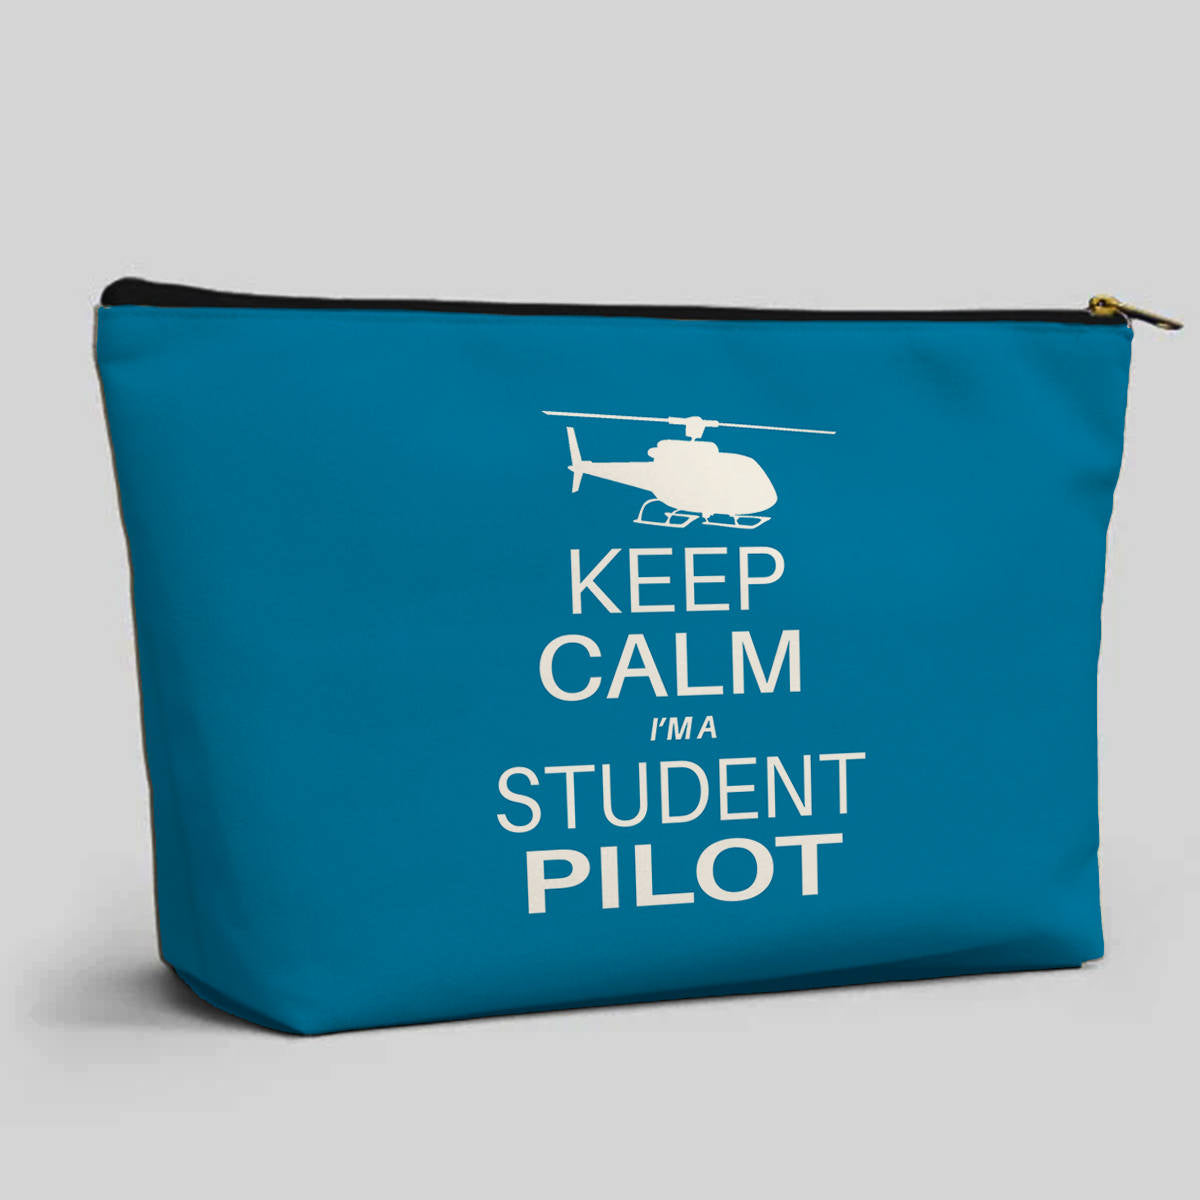 Student Pilot (Helicopter) Designed Zipper Pouch